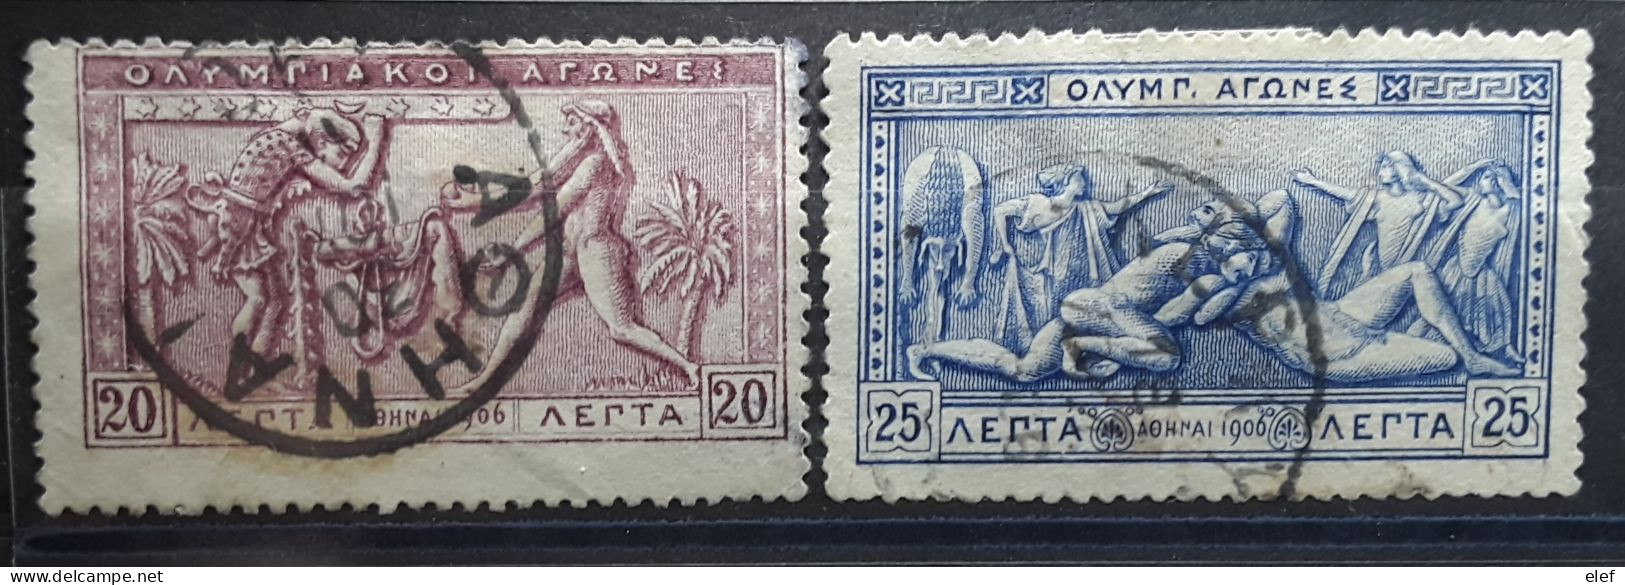 GRECE GREECE 1906, Jeux Olympiques OLYMPICS ATHENS 2 Timbres , Yvert 170  + 171 ,  Obl  TB - Used Stamps